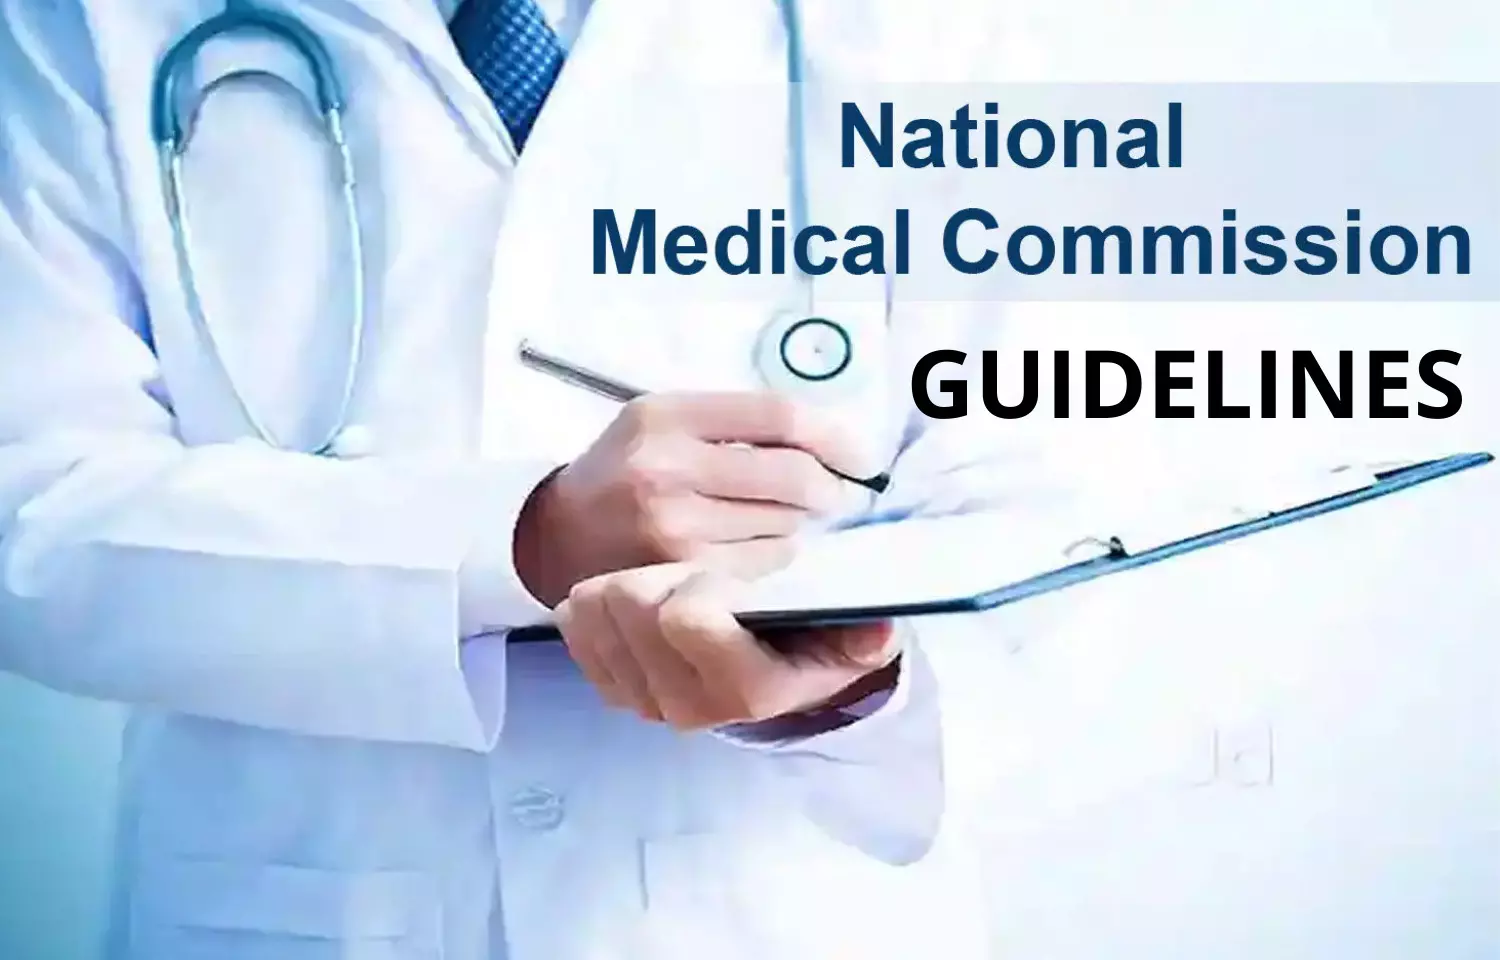 Protect Autonomy of State Medical Councils: IMA Punjab submits suggestions on NMC Draft RMP Regulations